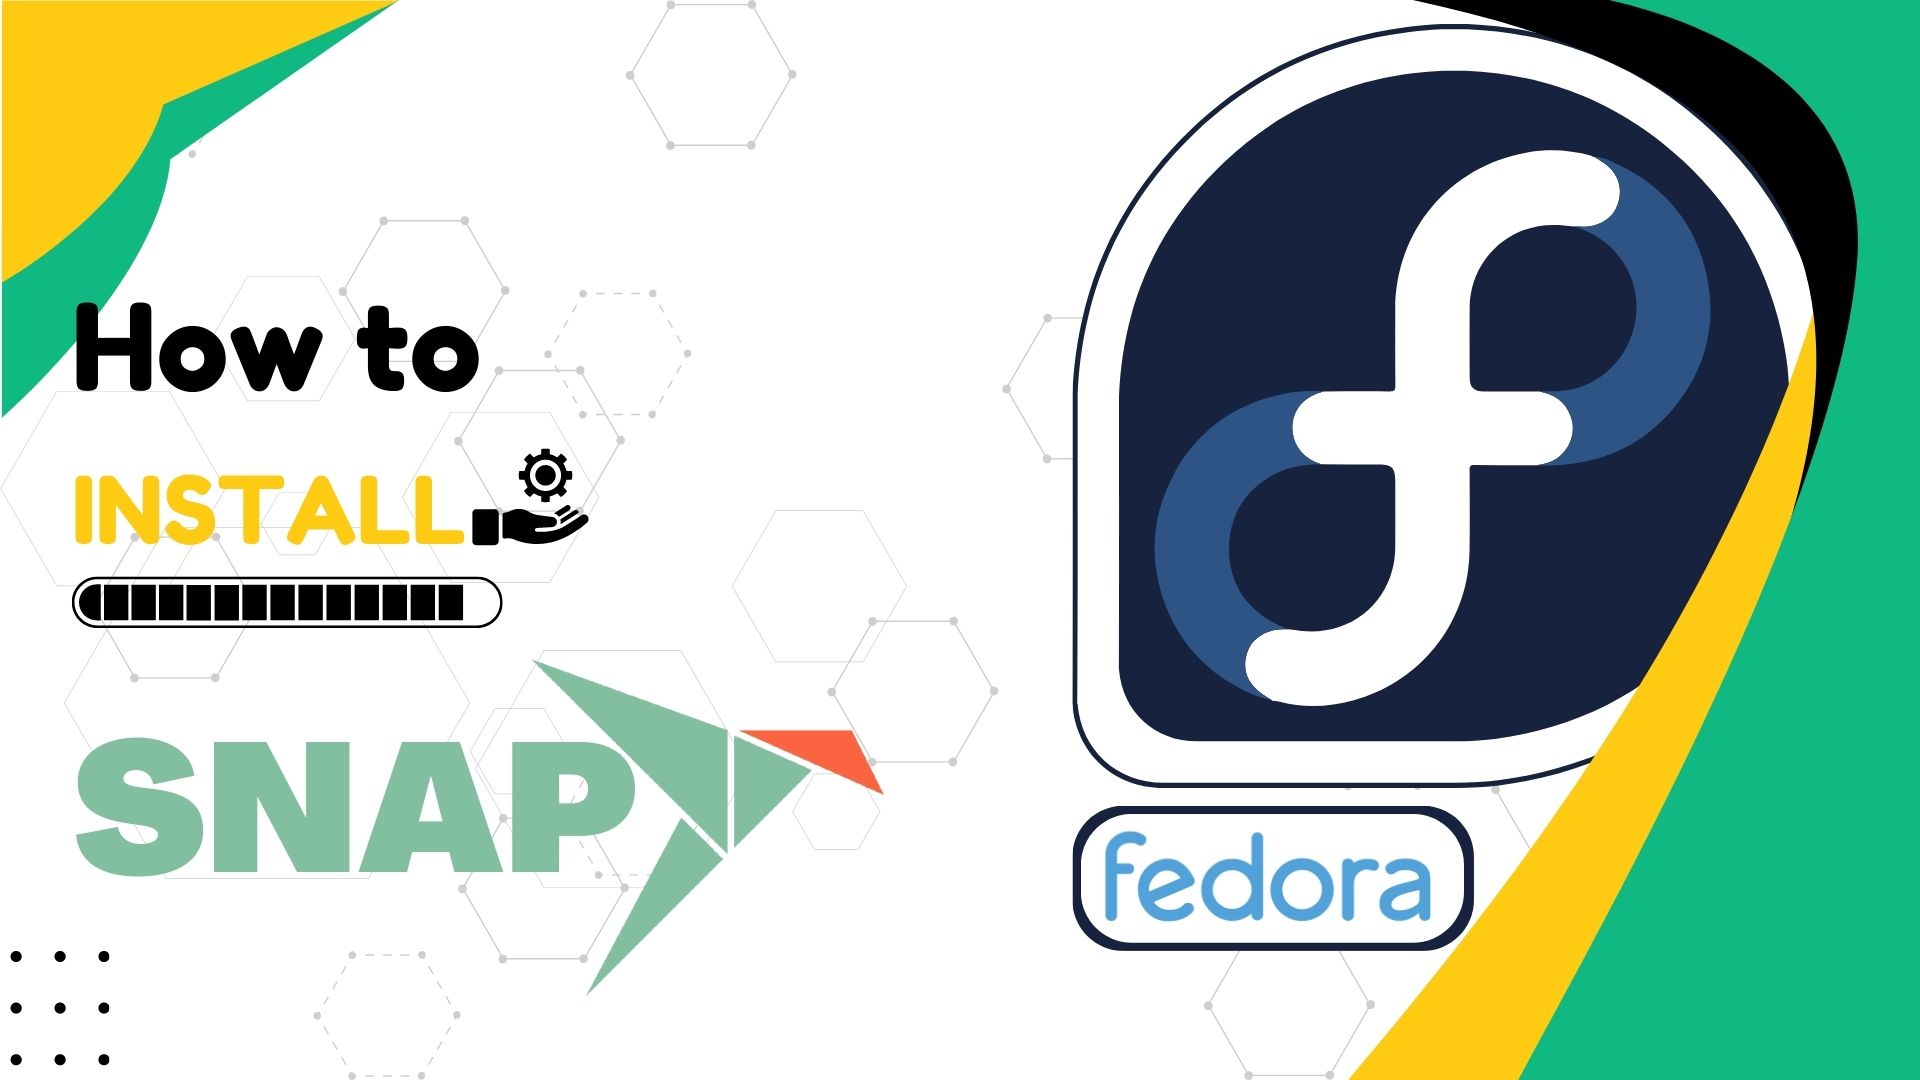 How to install Snap on Fedora